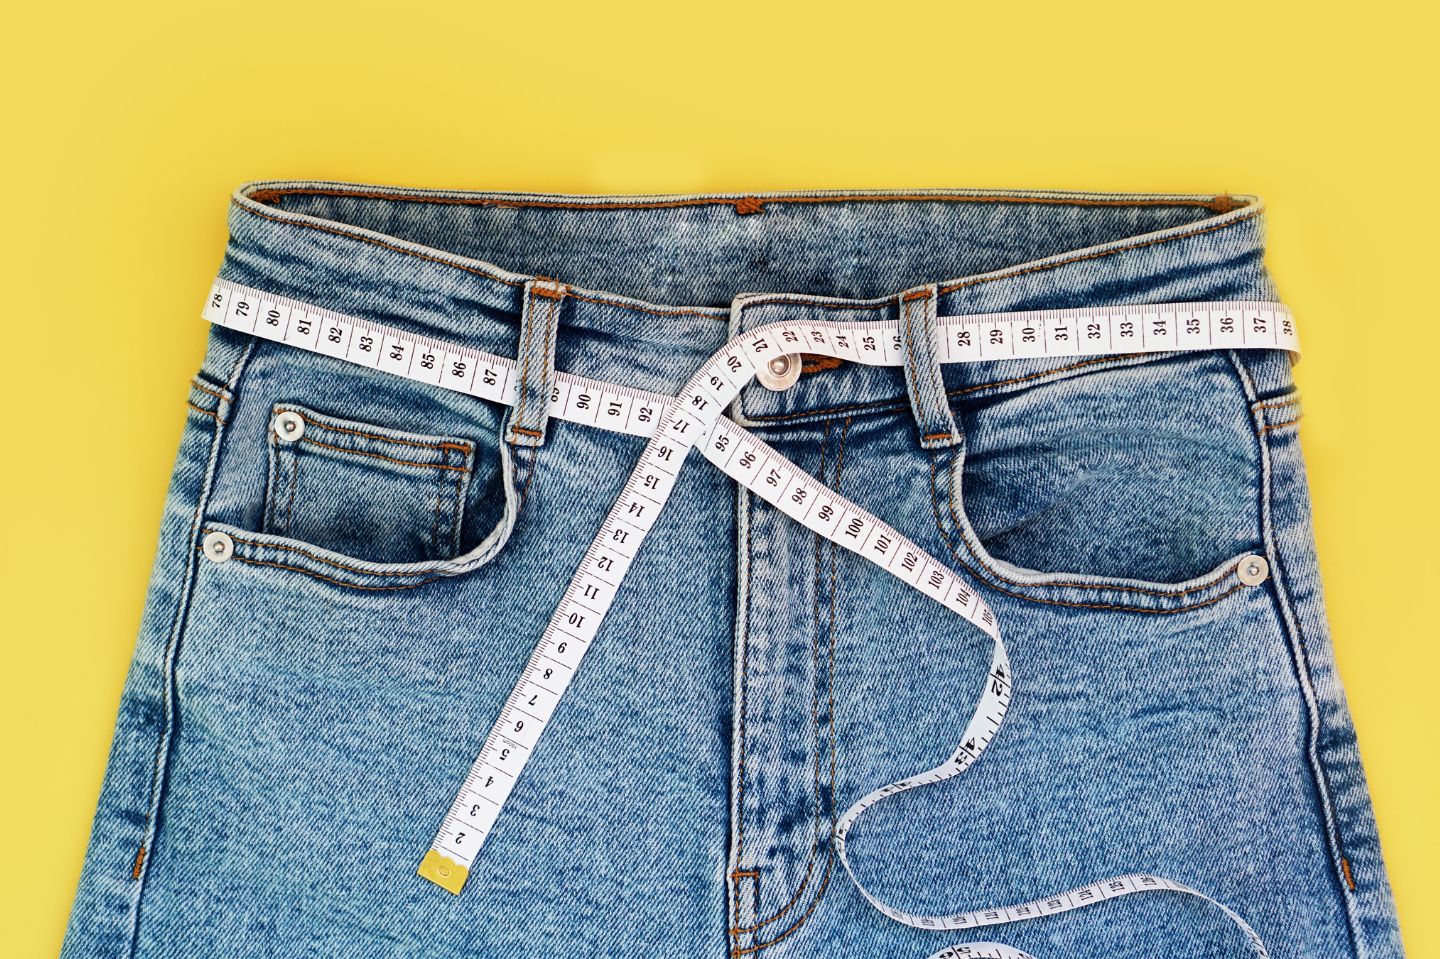 This is how much weight you can lose in a month safely